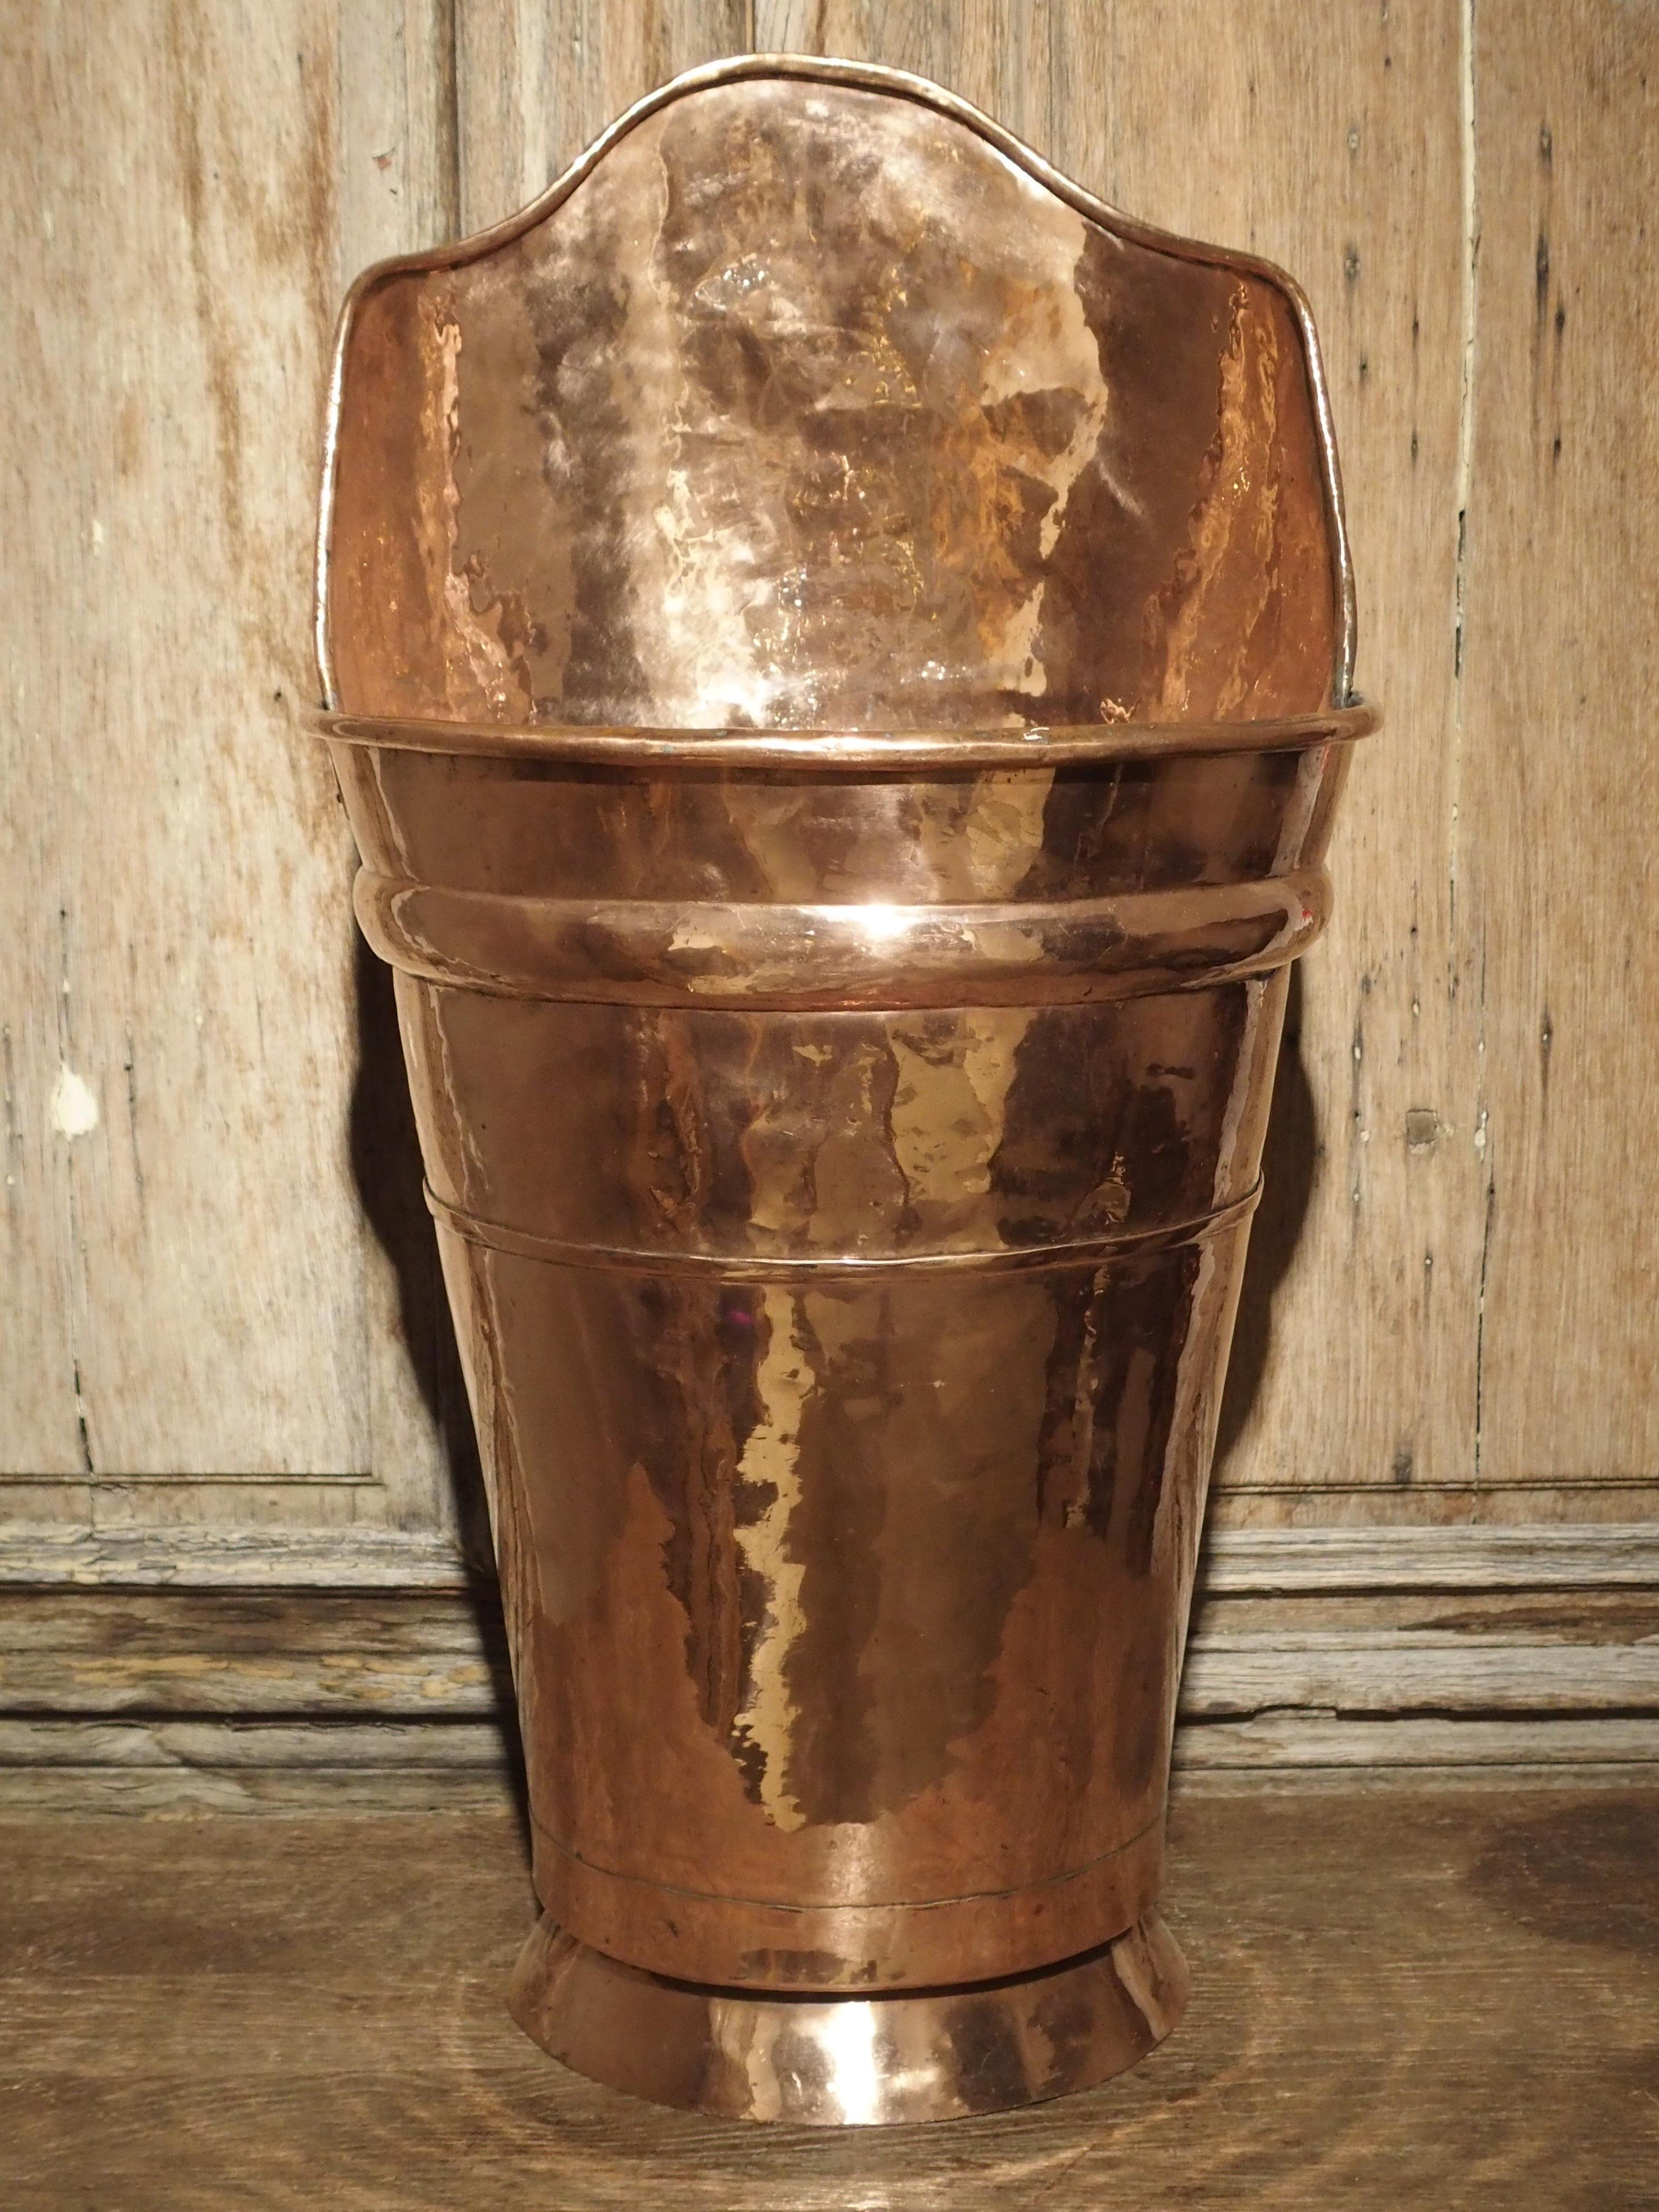 This ceremonial copper grape hotte is from France and dates to the 1700s. The French Hotte is a carrying basket for the wine grapes. Since they were used for collecting grapes, they are usually made from woven cane. Tin was also used in the late